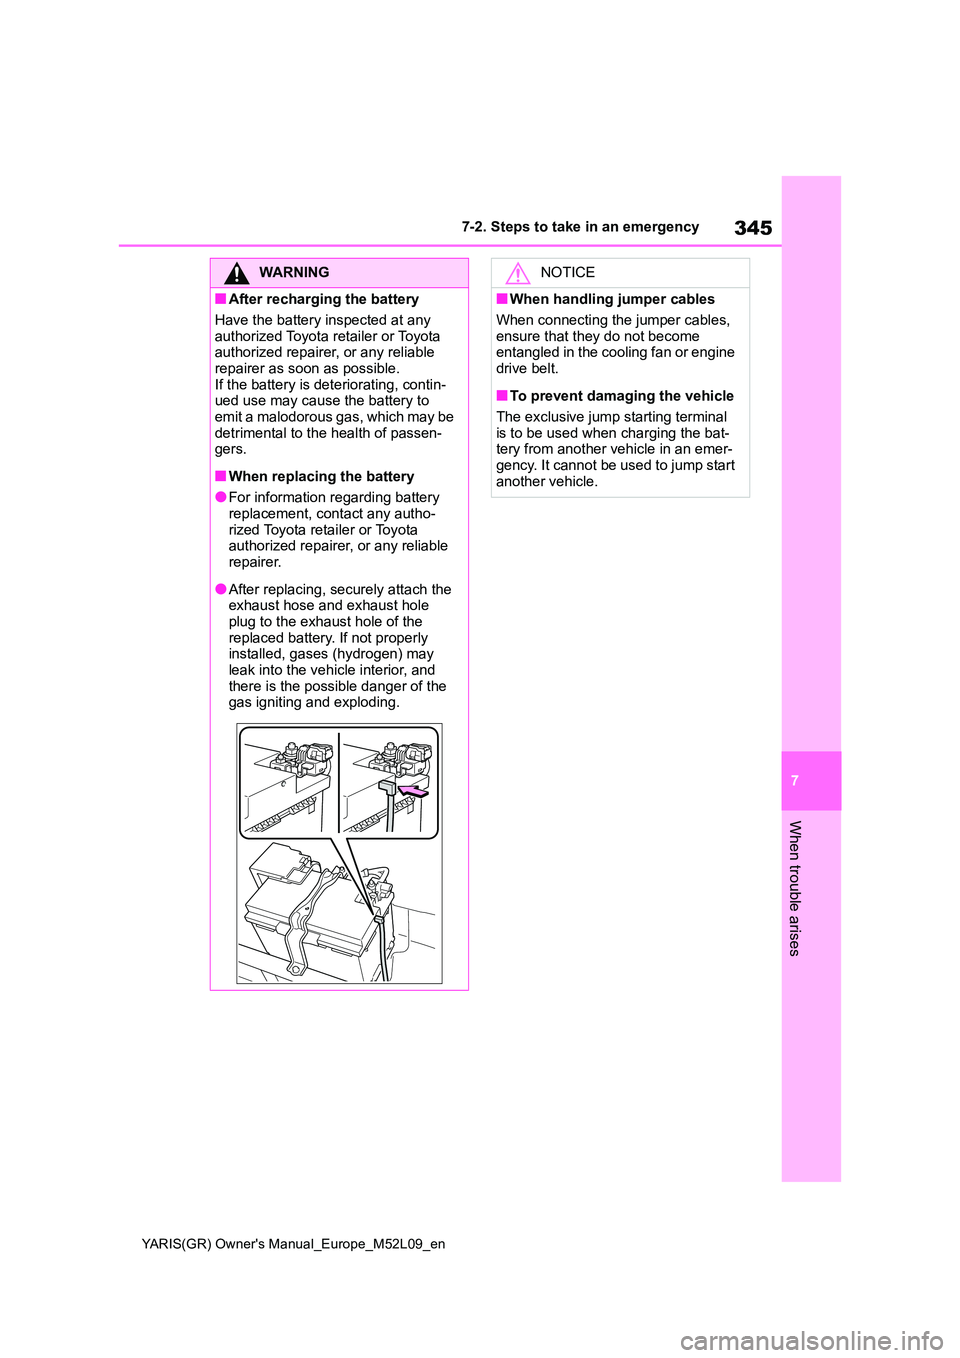 TOYOTA GR YARIS 2020  Owners Manual (in English) 345
7
YARIS(GR) Owners Manual_Europe_M52L09_en
7-2. Steps to take in an emergency
When trouble arises
WARNING
■After recharging the battery 
Have the battery inspected at any  
authorized Toyota re